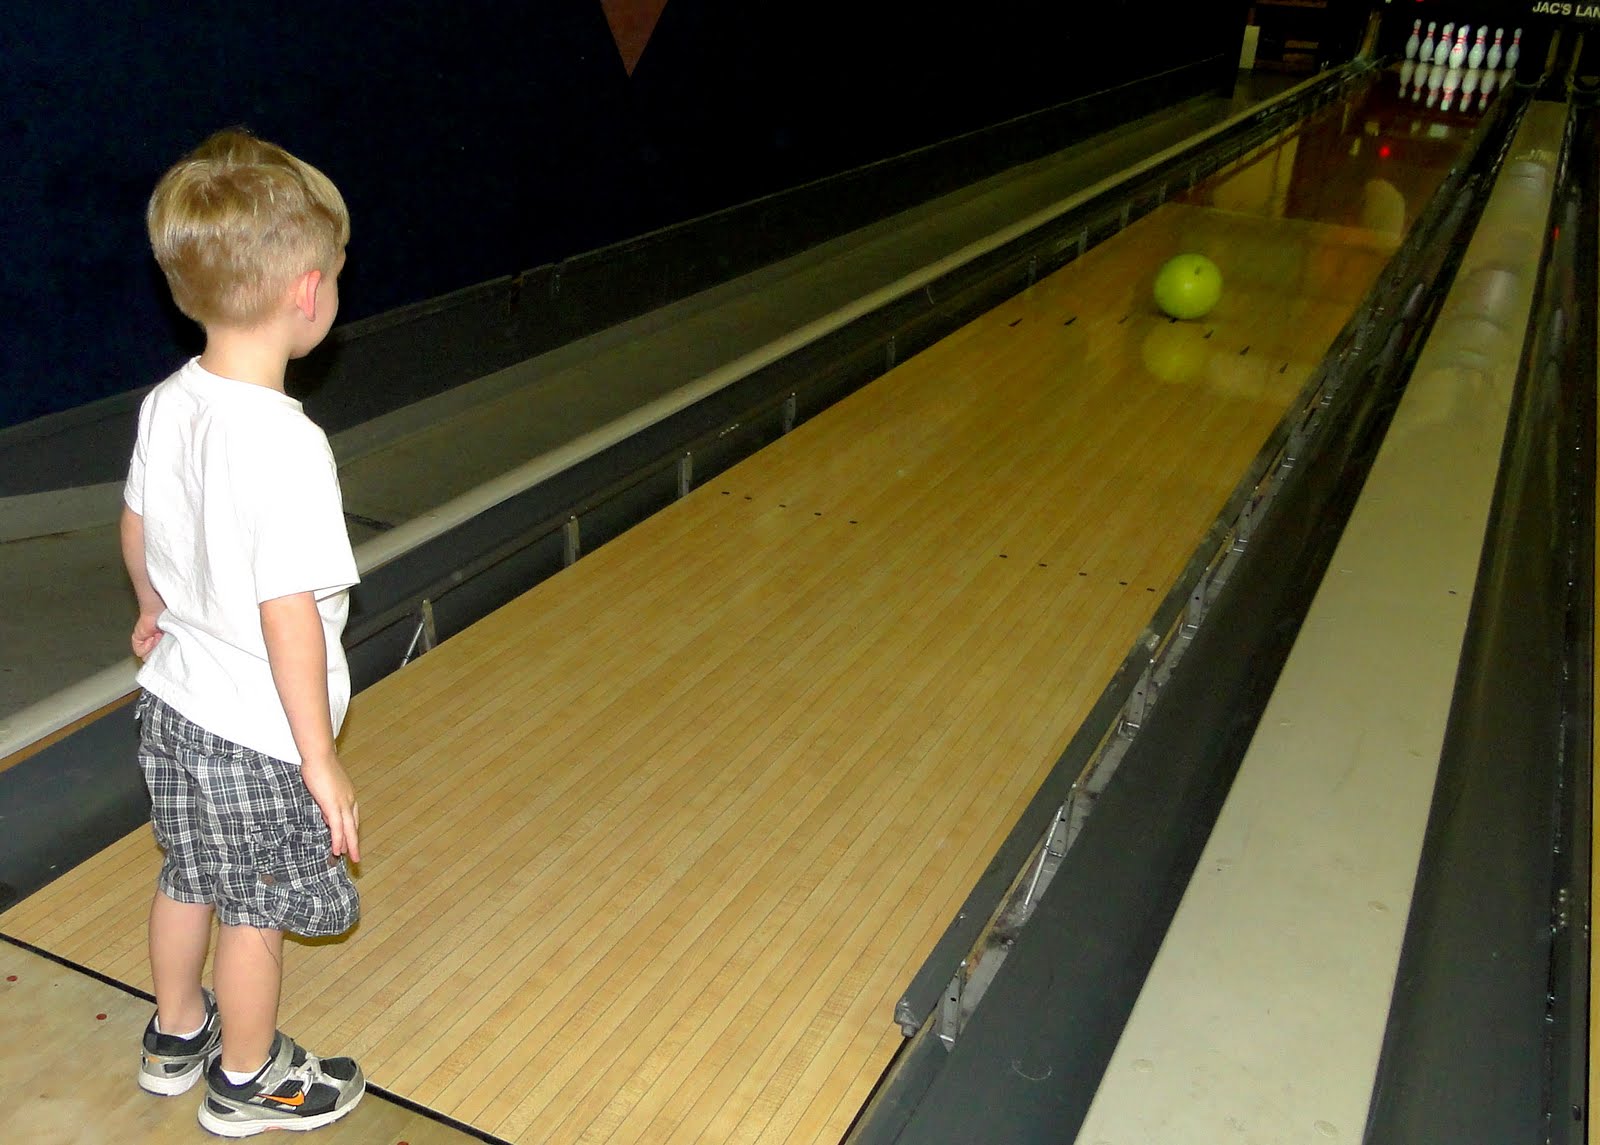 Kye’s First Time Bowling